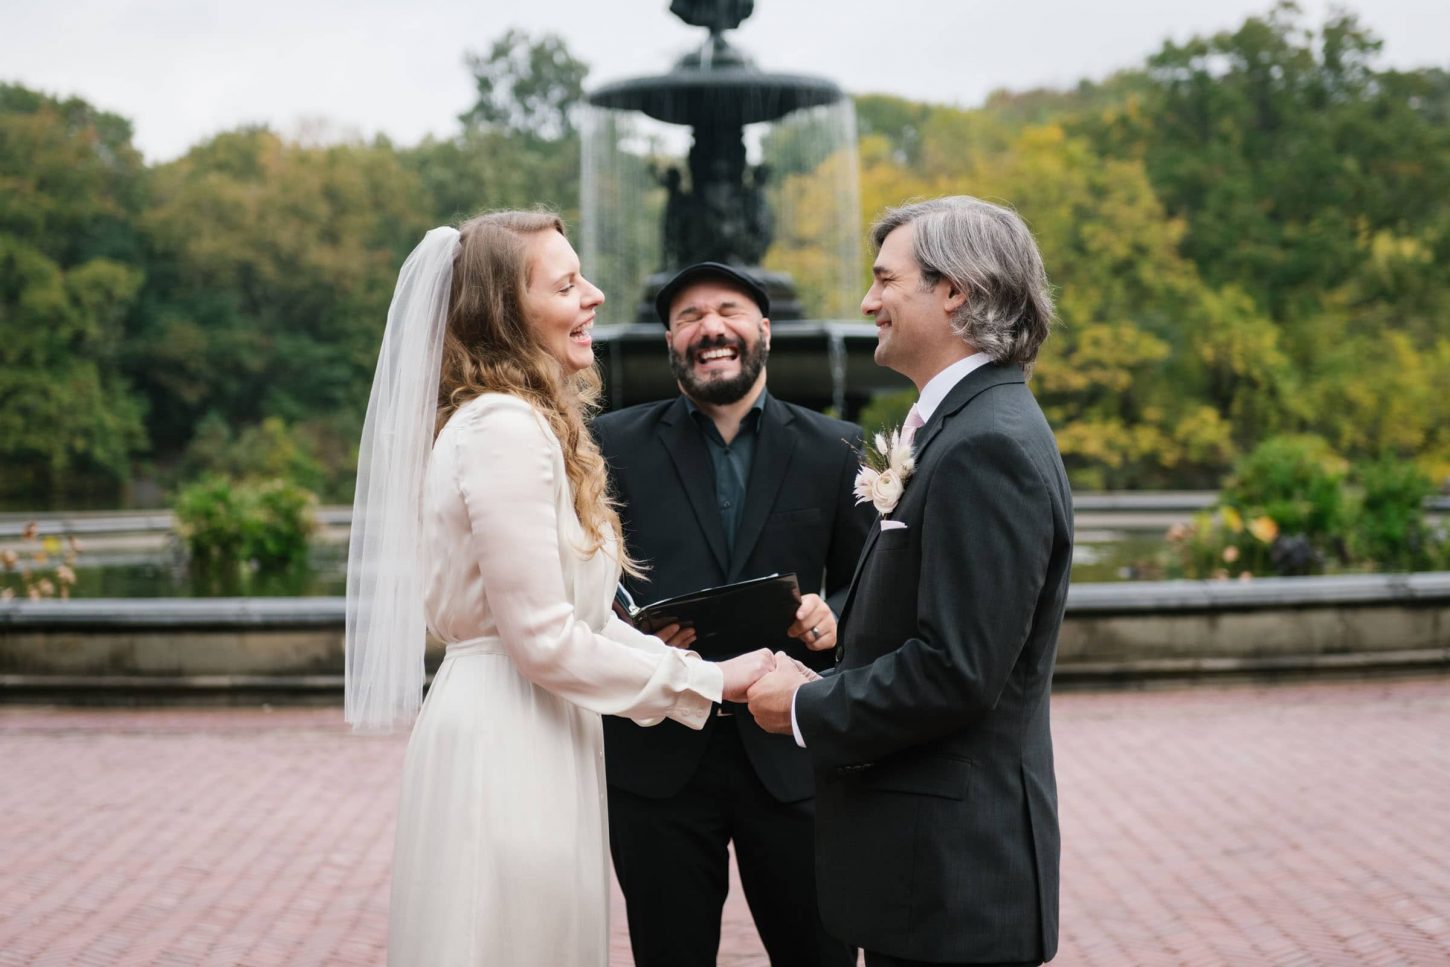 Bethesda Fountain elopement in Central Park NYC. Small wedding at Bethesda Terrace and Fountain in New York.